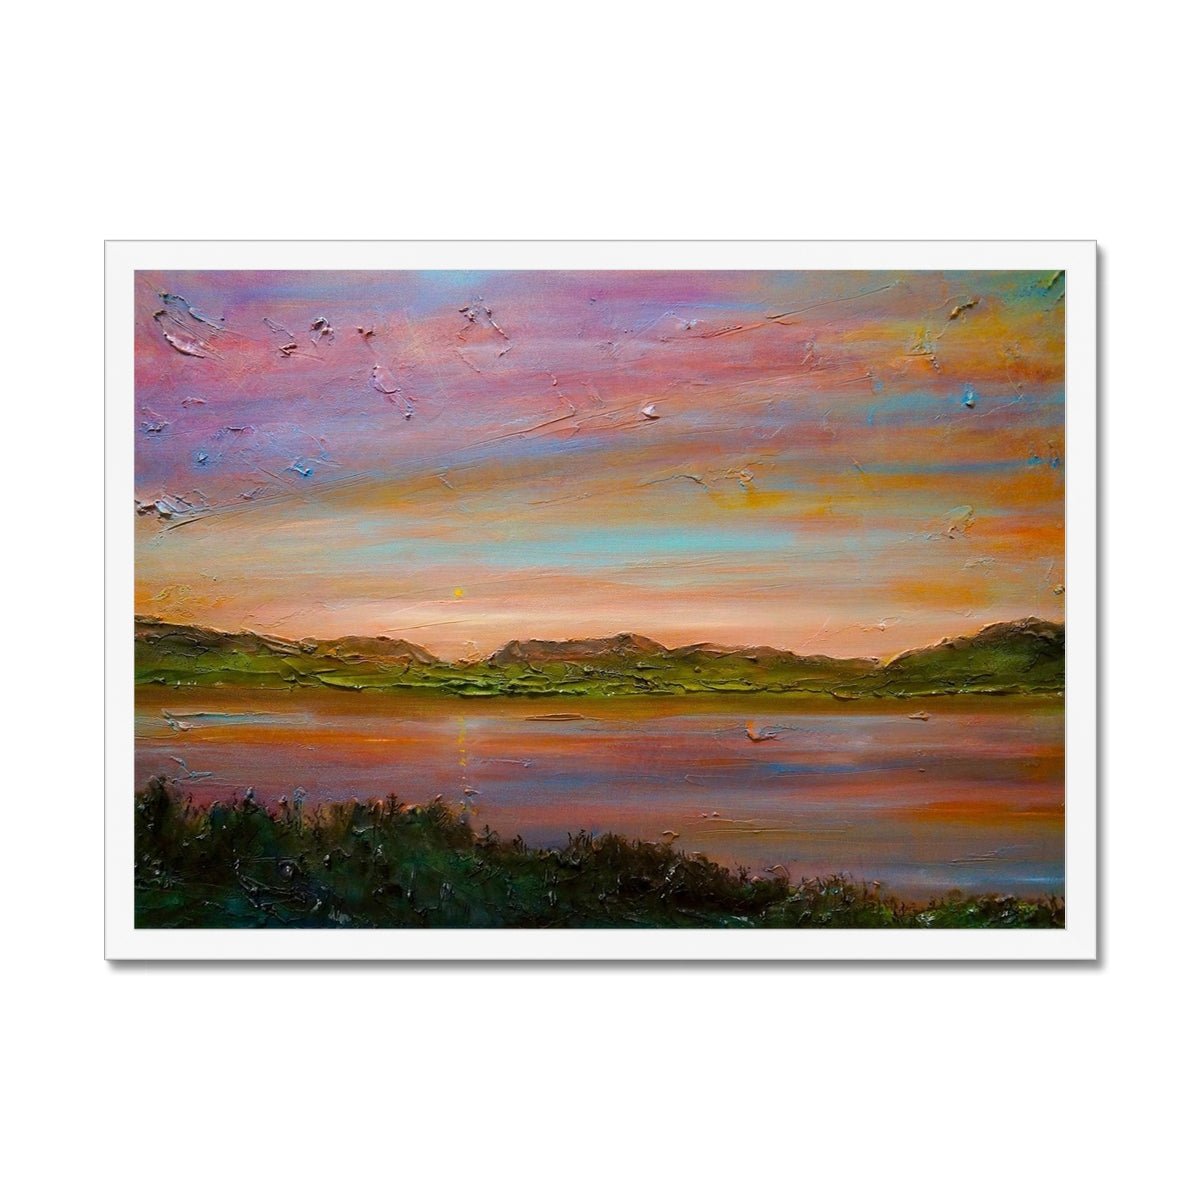 Gourock Golf Club Sunset Painting | Framed Prints From Scotland-Framed Prints-River Clyde Art Gallery-A2 Landscape-White Frame-Paintings, Prints, Homeware, Art Gifts From Scotland By Scottish Artist Kevin Hunter